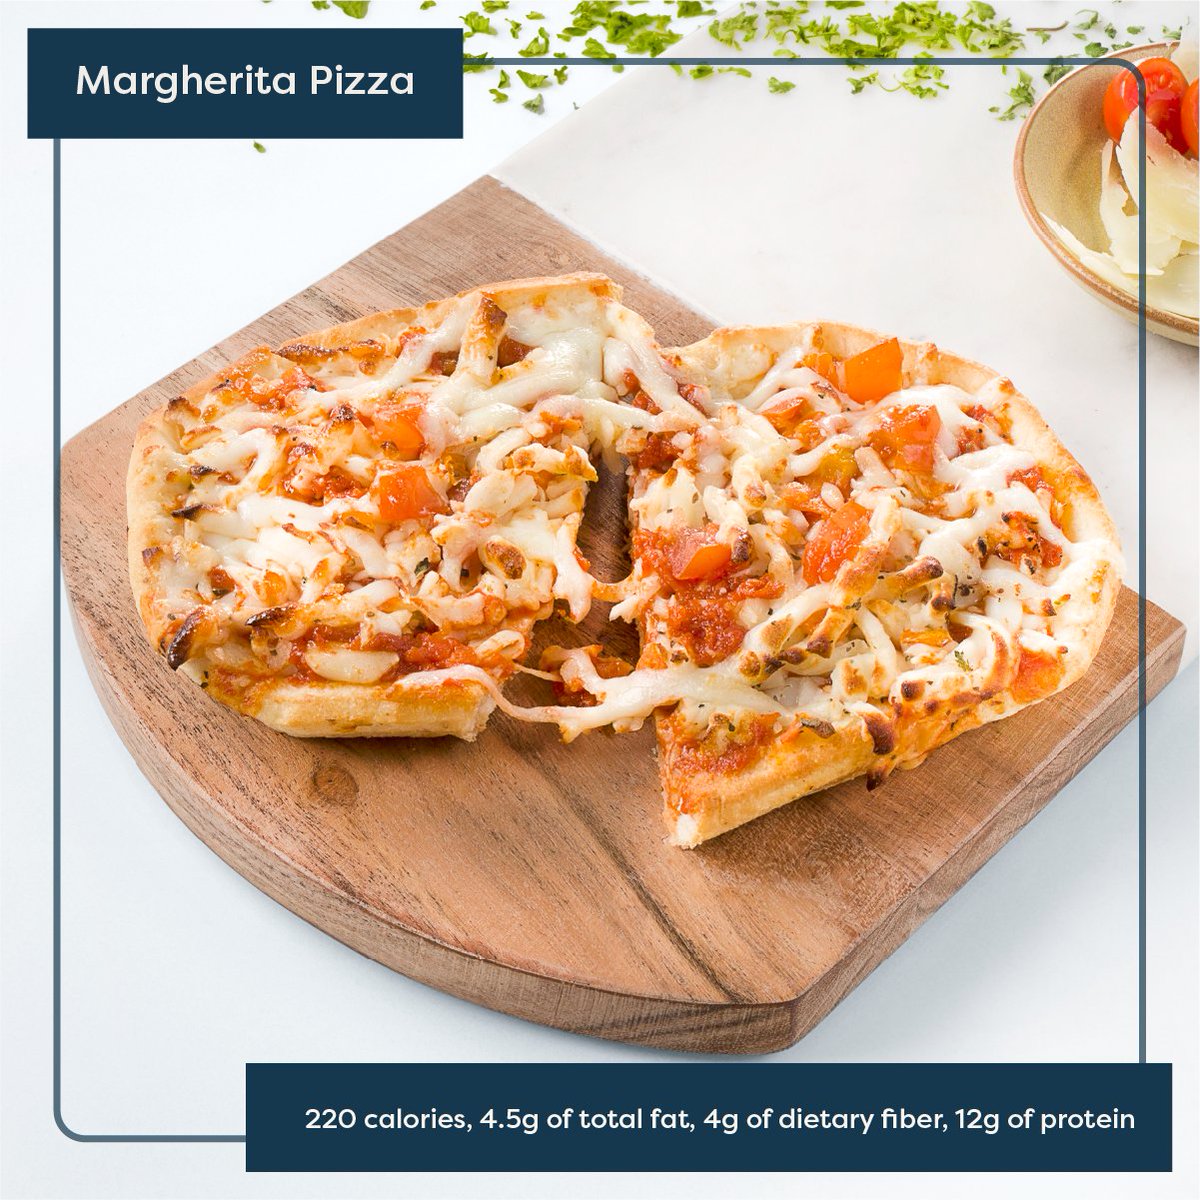 With the NEW Jenny Craig, you don’t have to sacrifice your favorite meals to lose weight. Add our Margherita Pizza into your next order and see what the all hype’s about! 😋